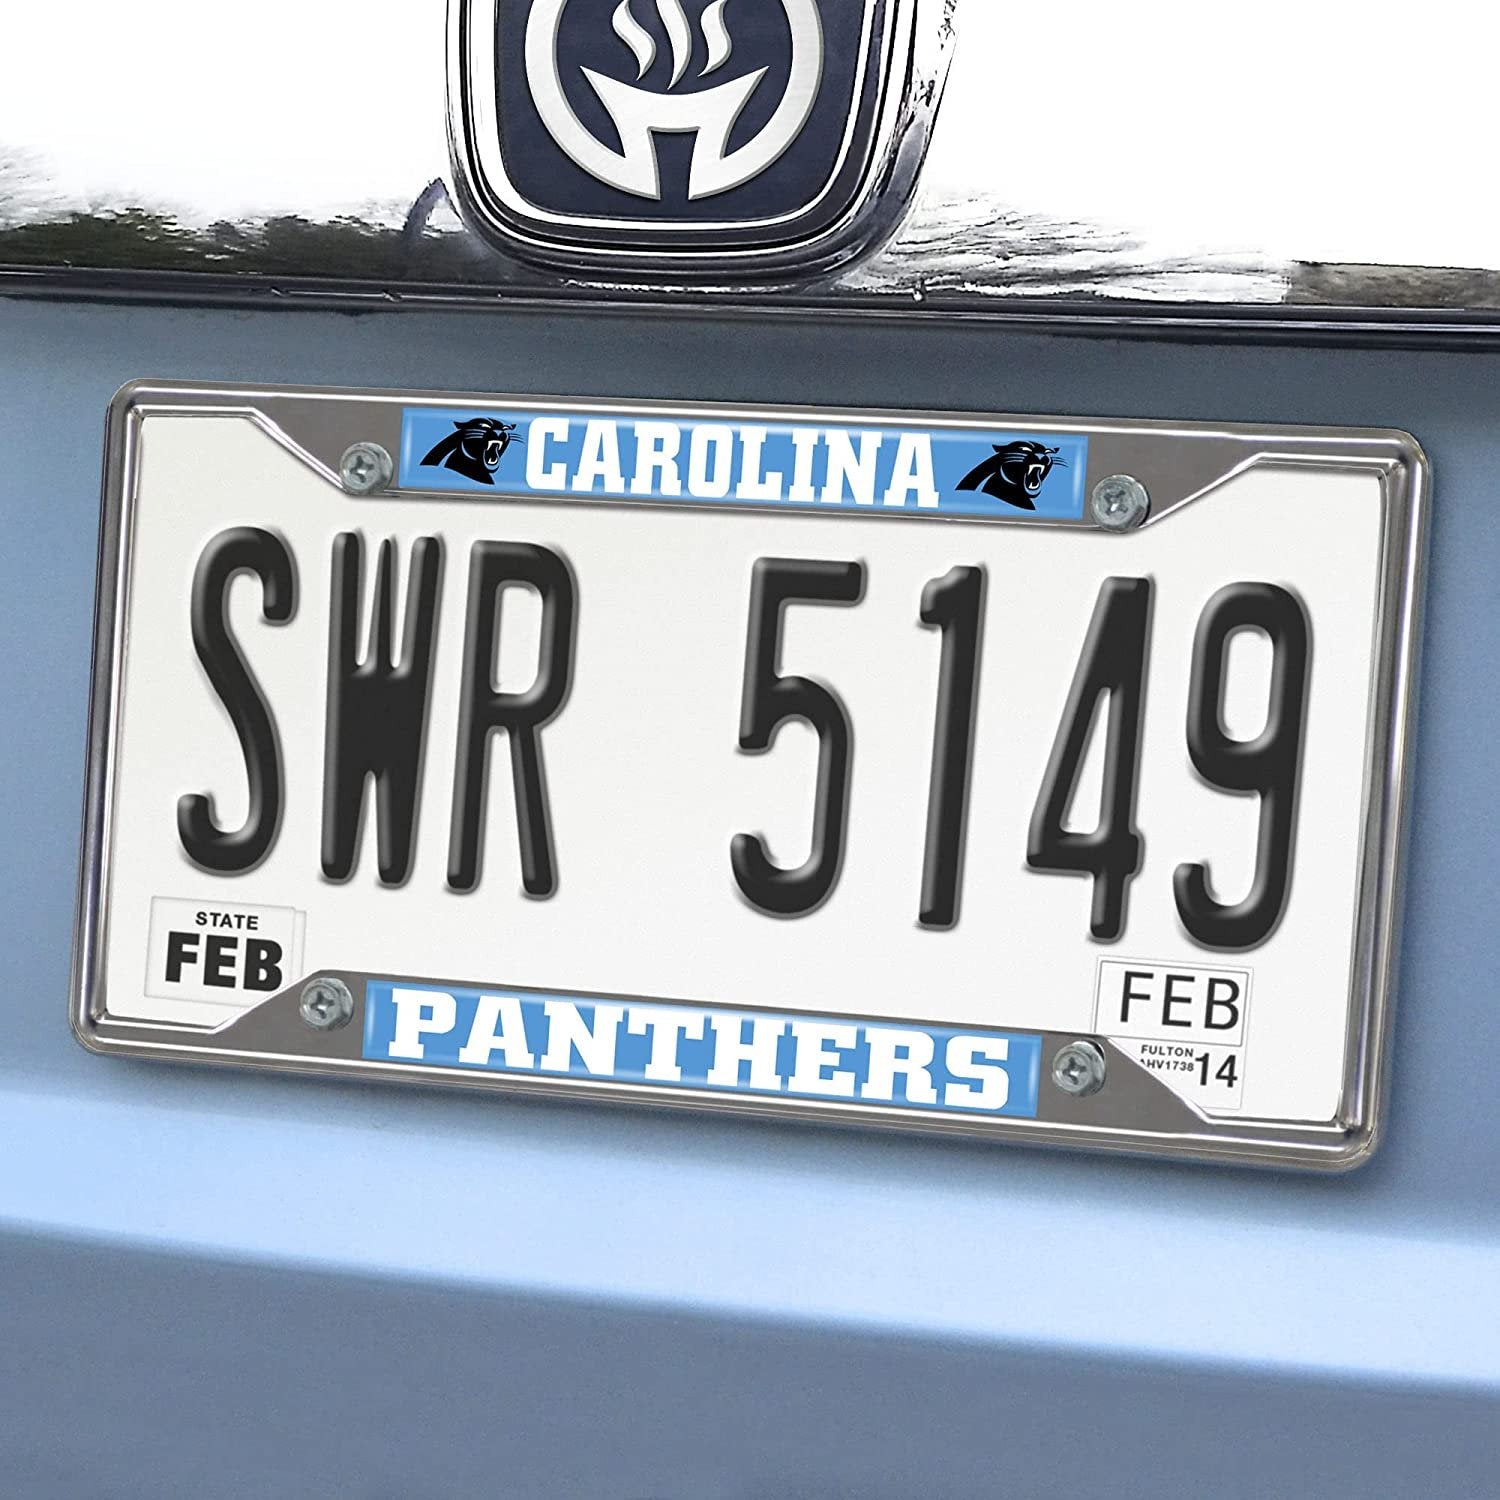 Carolina Panthers Metal License Plate Frame Chrome Tag Cover 6x12 Inch